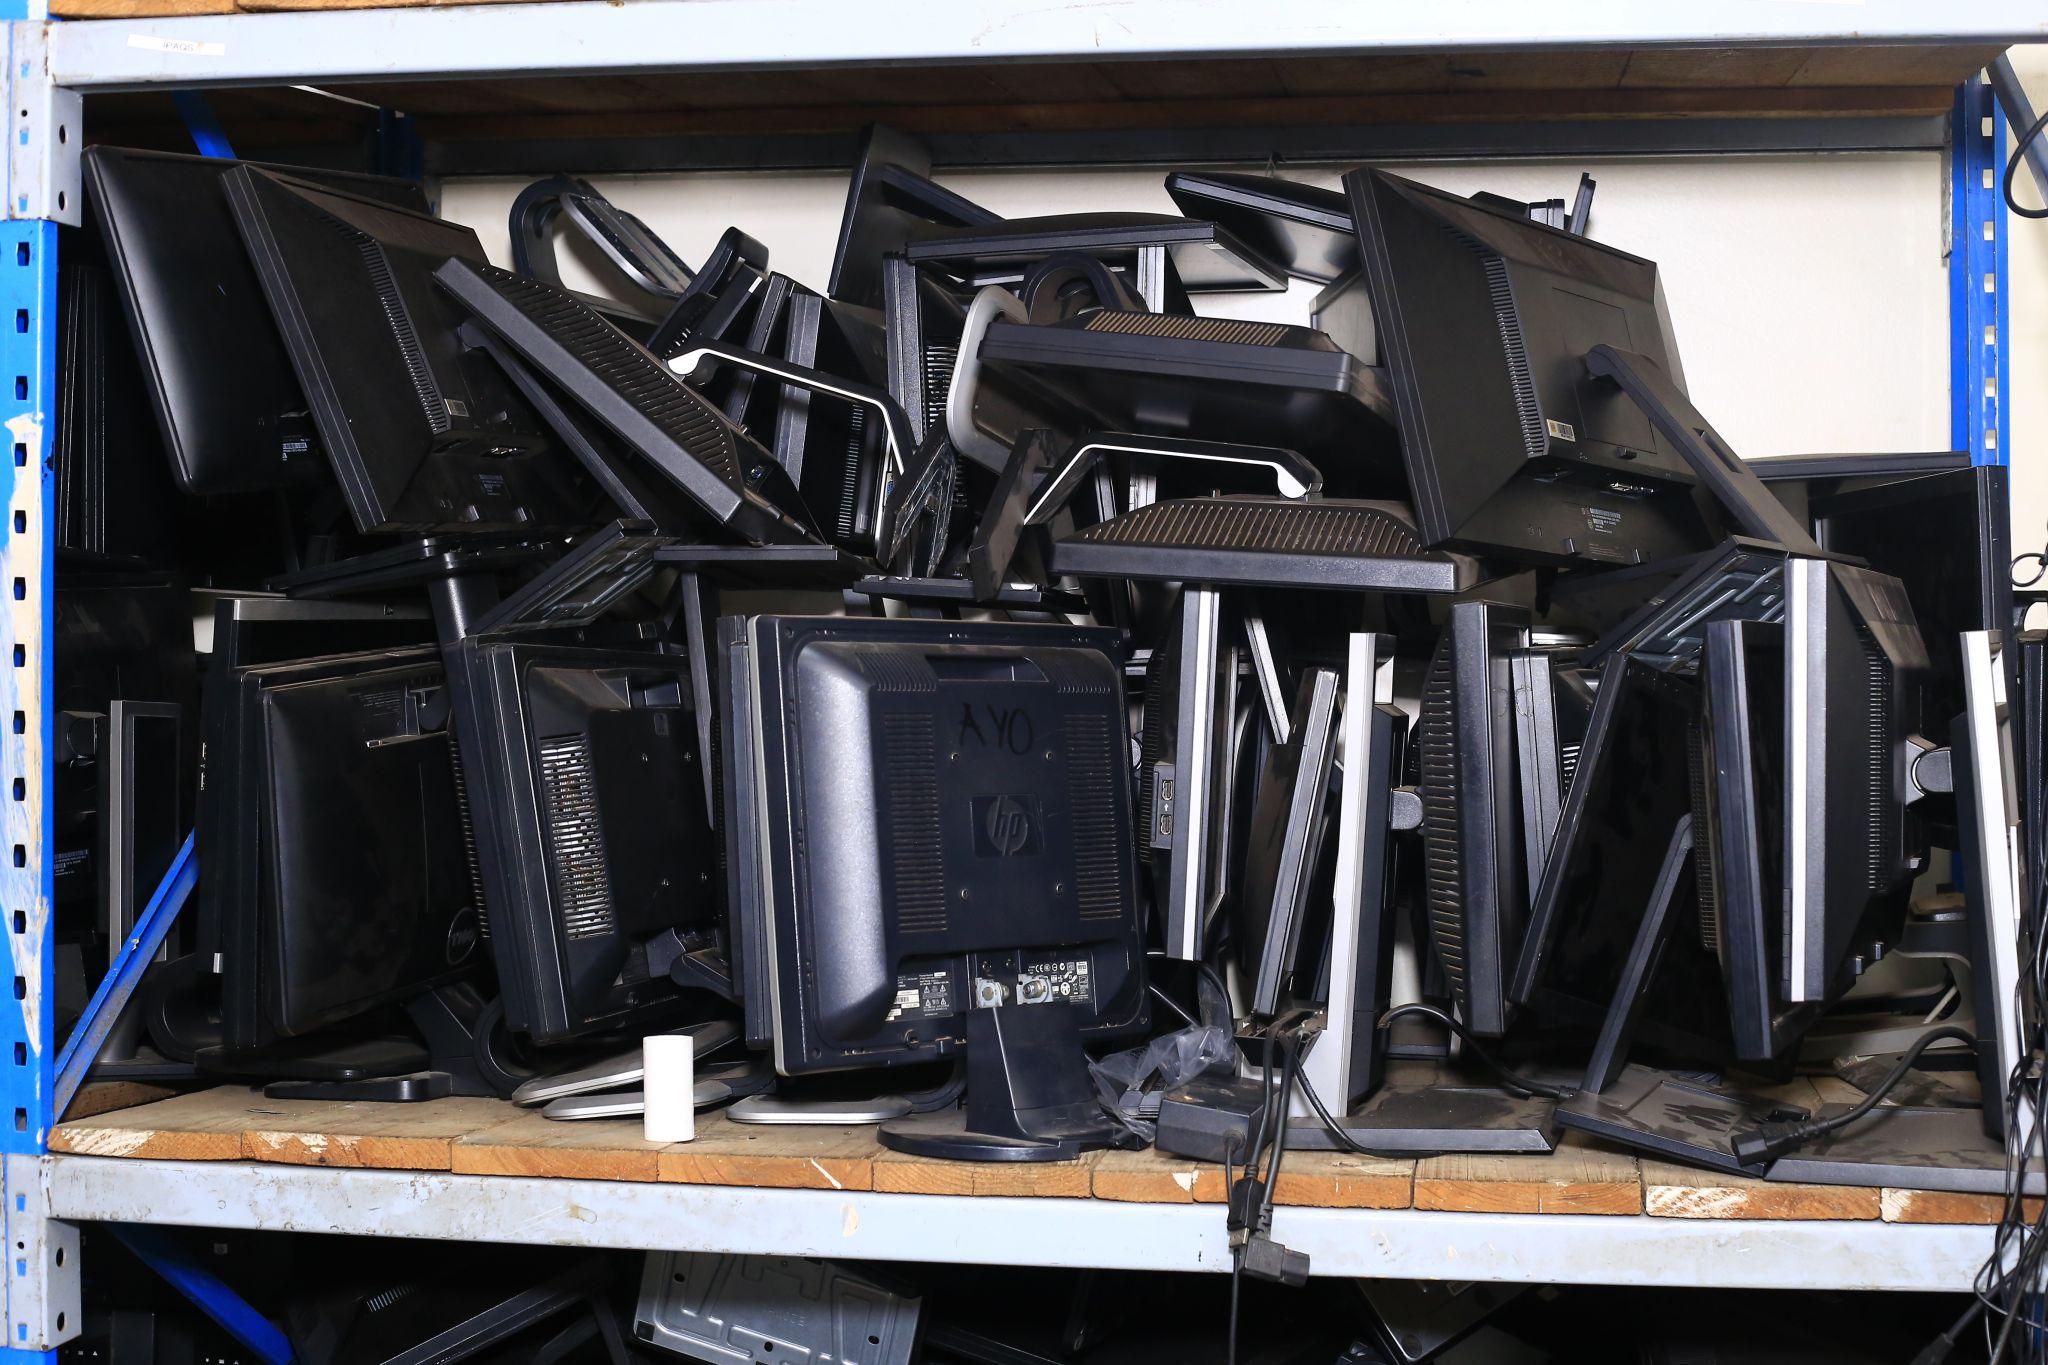 MTN Uganda donating e-waste items monitors, desktops, and laptops to Makerere University to be revamped and donated to rural secondary schools.